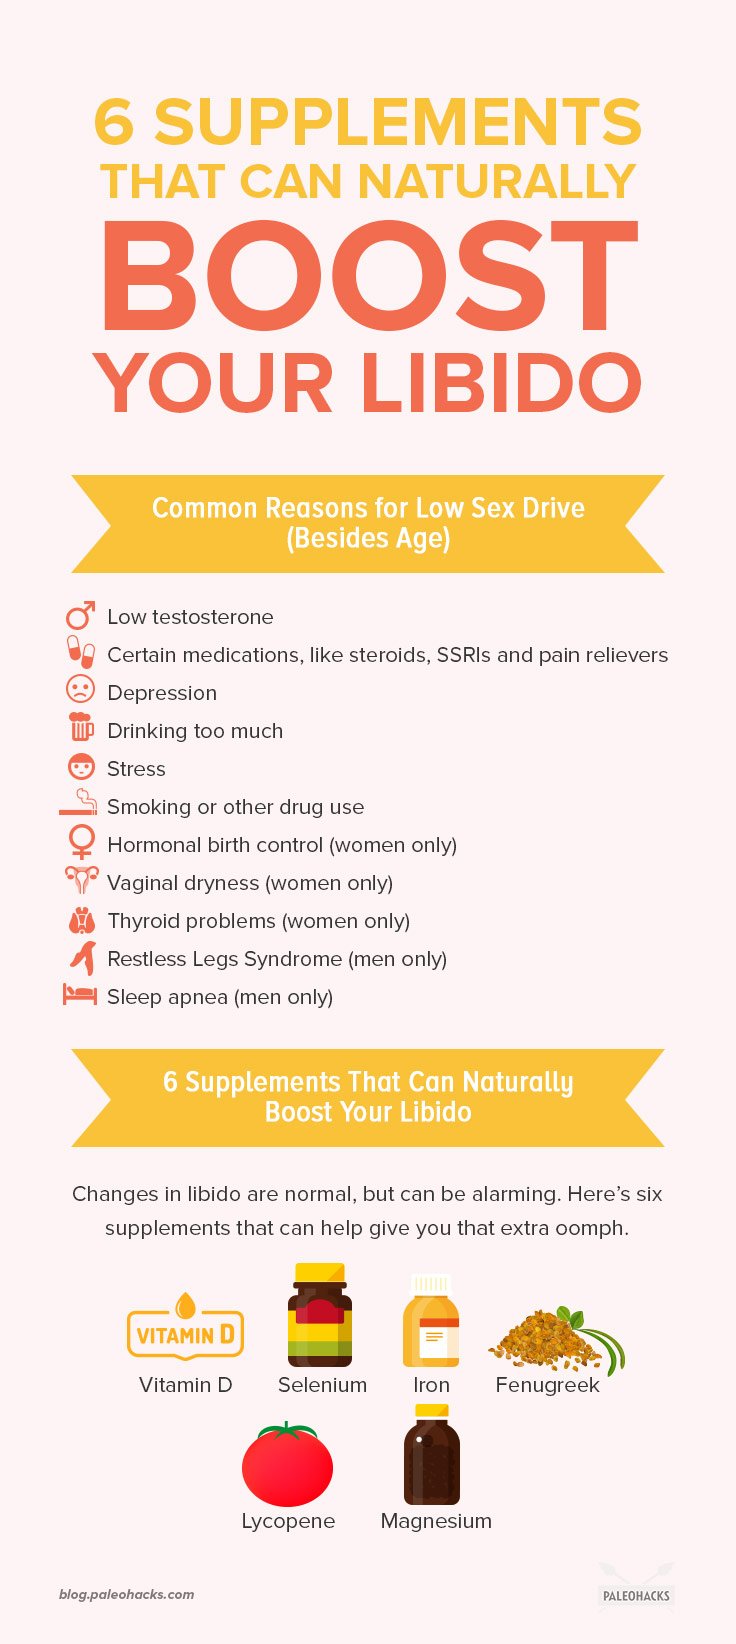 Changes in your sex drive are normal, but it can be alarming. Here are six supplements that might be able to help if you’re worried about your libido.